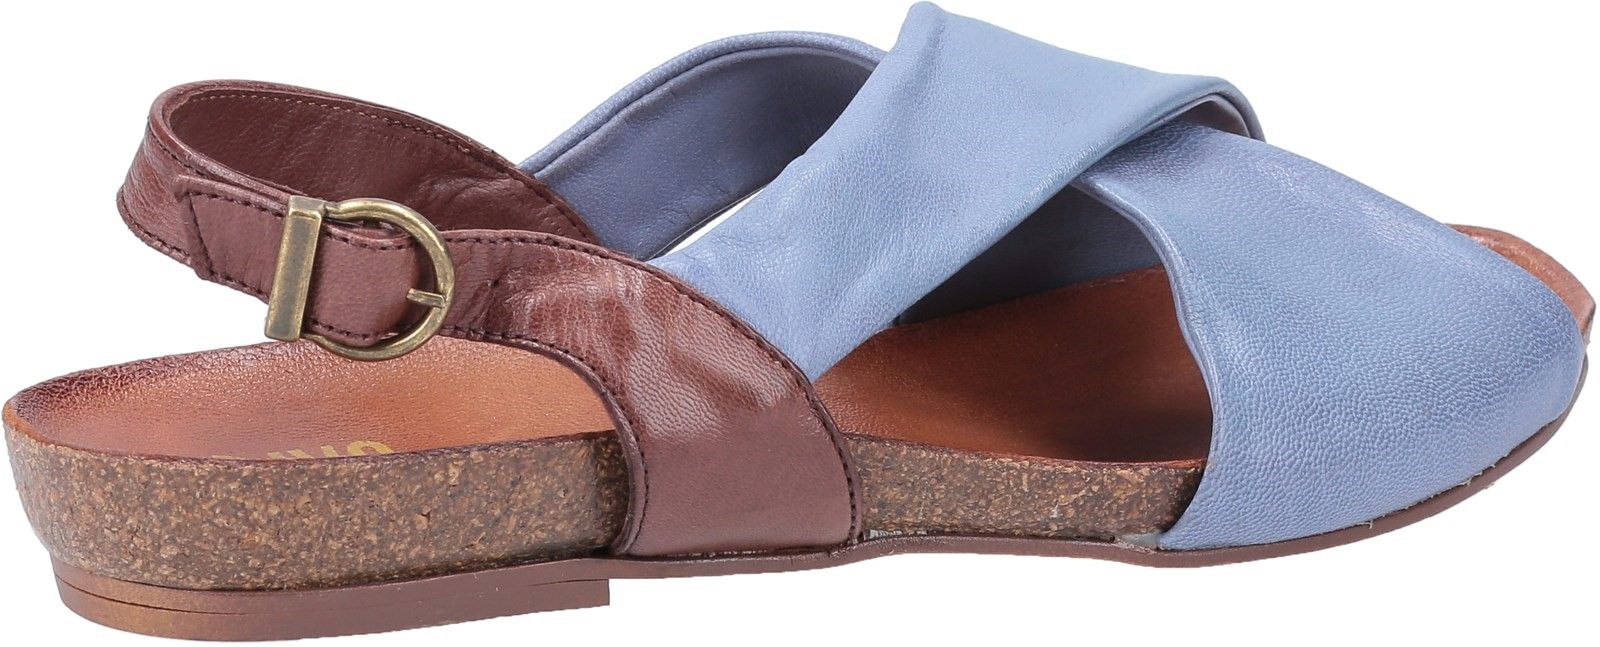 Riva Pontiella is a womens stylish and versatile flat slingback summer sandal with soft leather uppers in a crossover design, contrast colour heel strap with buckle closure and leather covered moulded footbed for comfort.